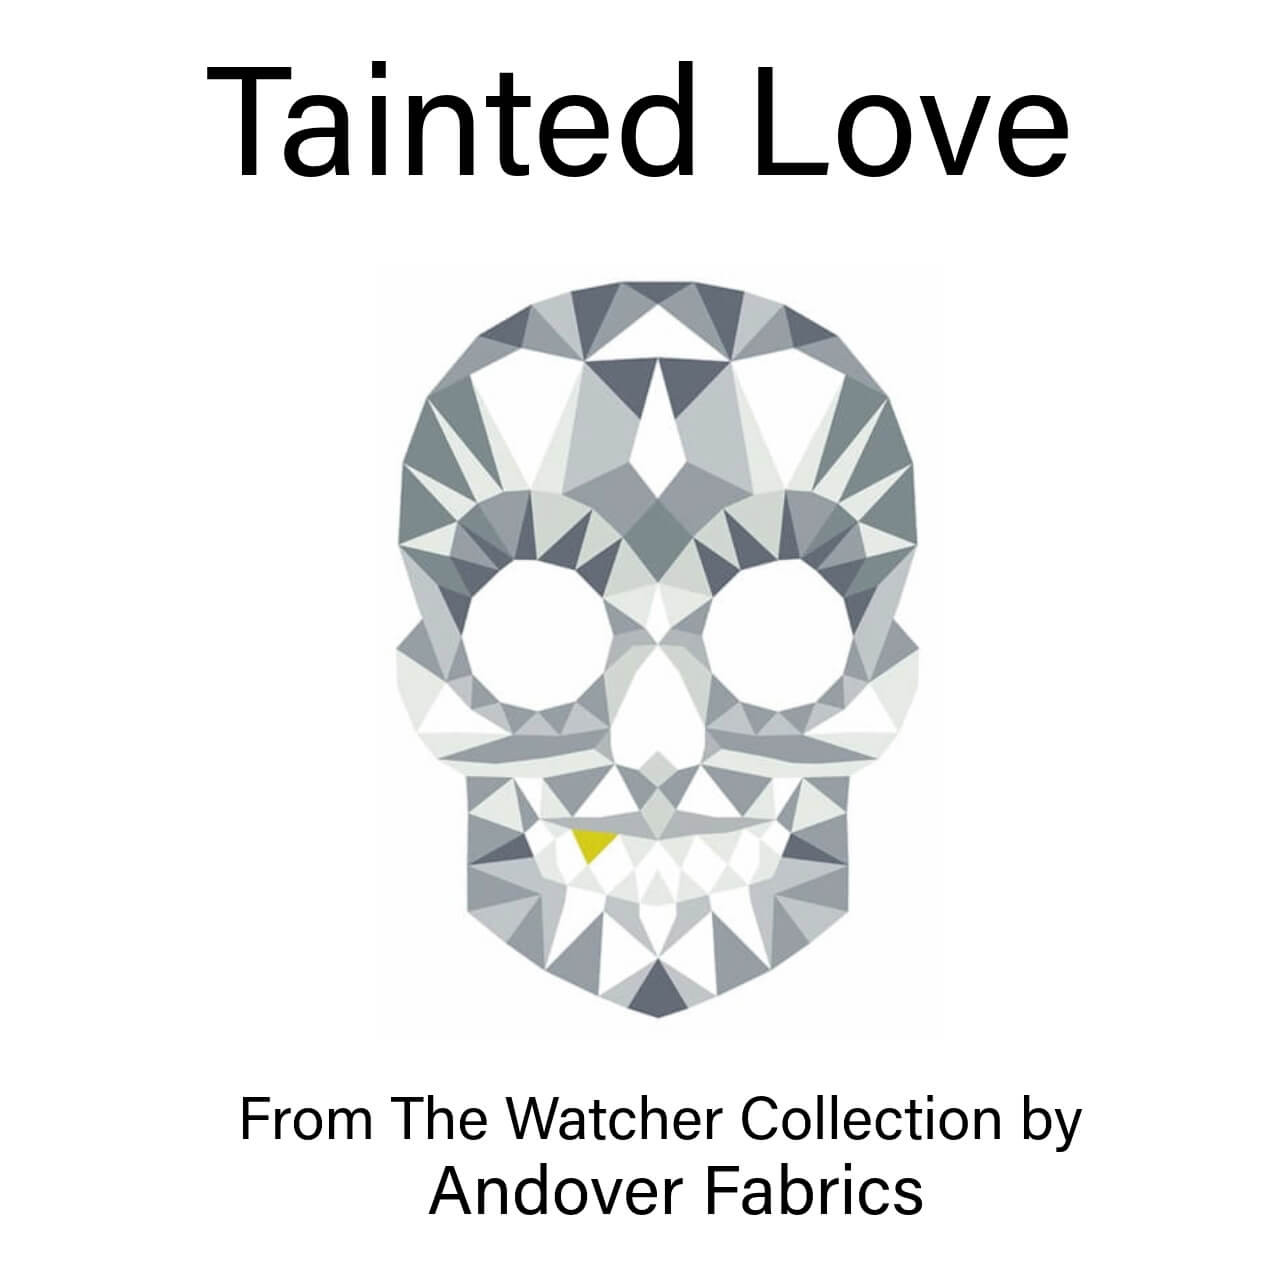 The Tainted Love Logo from The Watcher collection